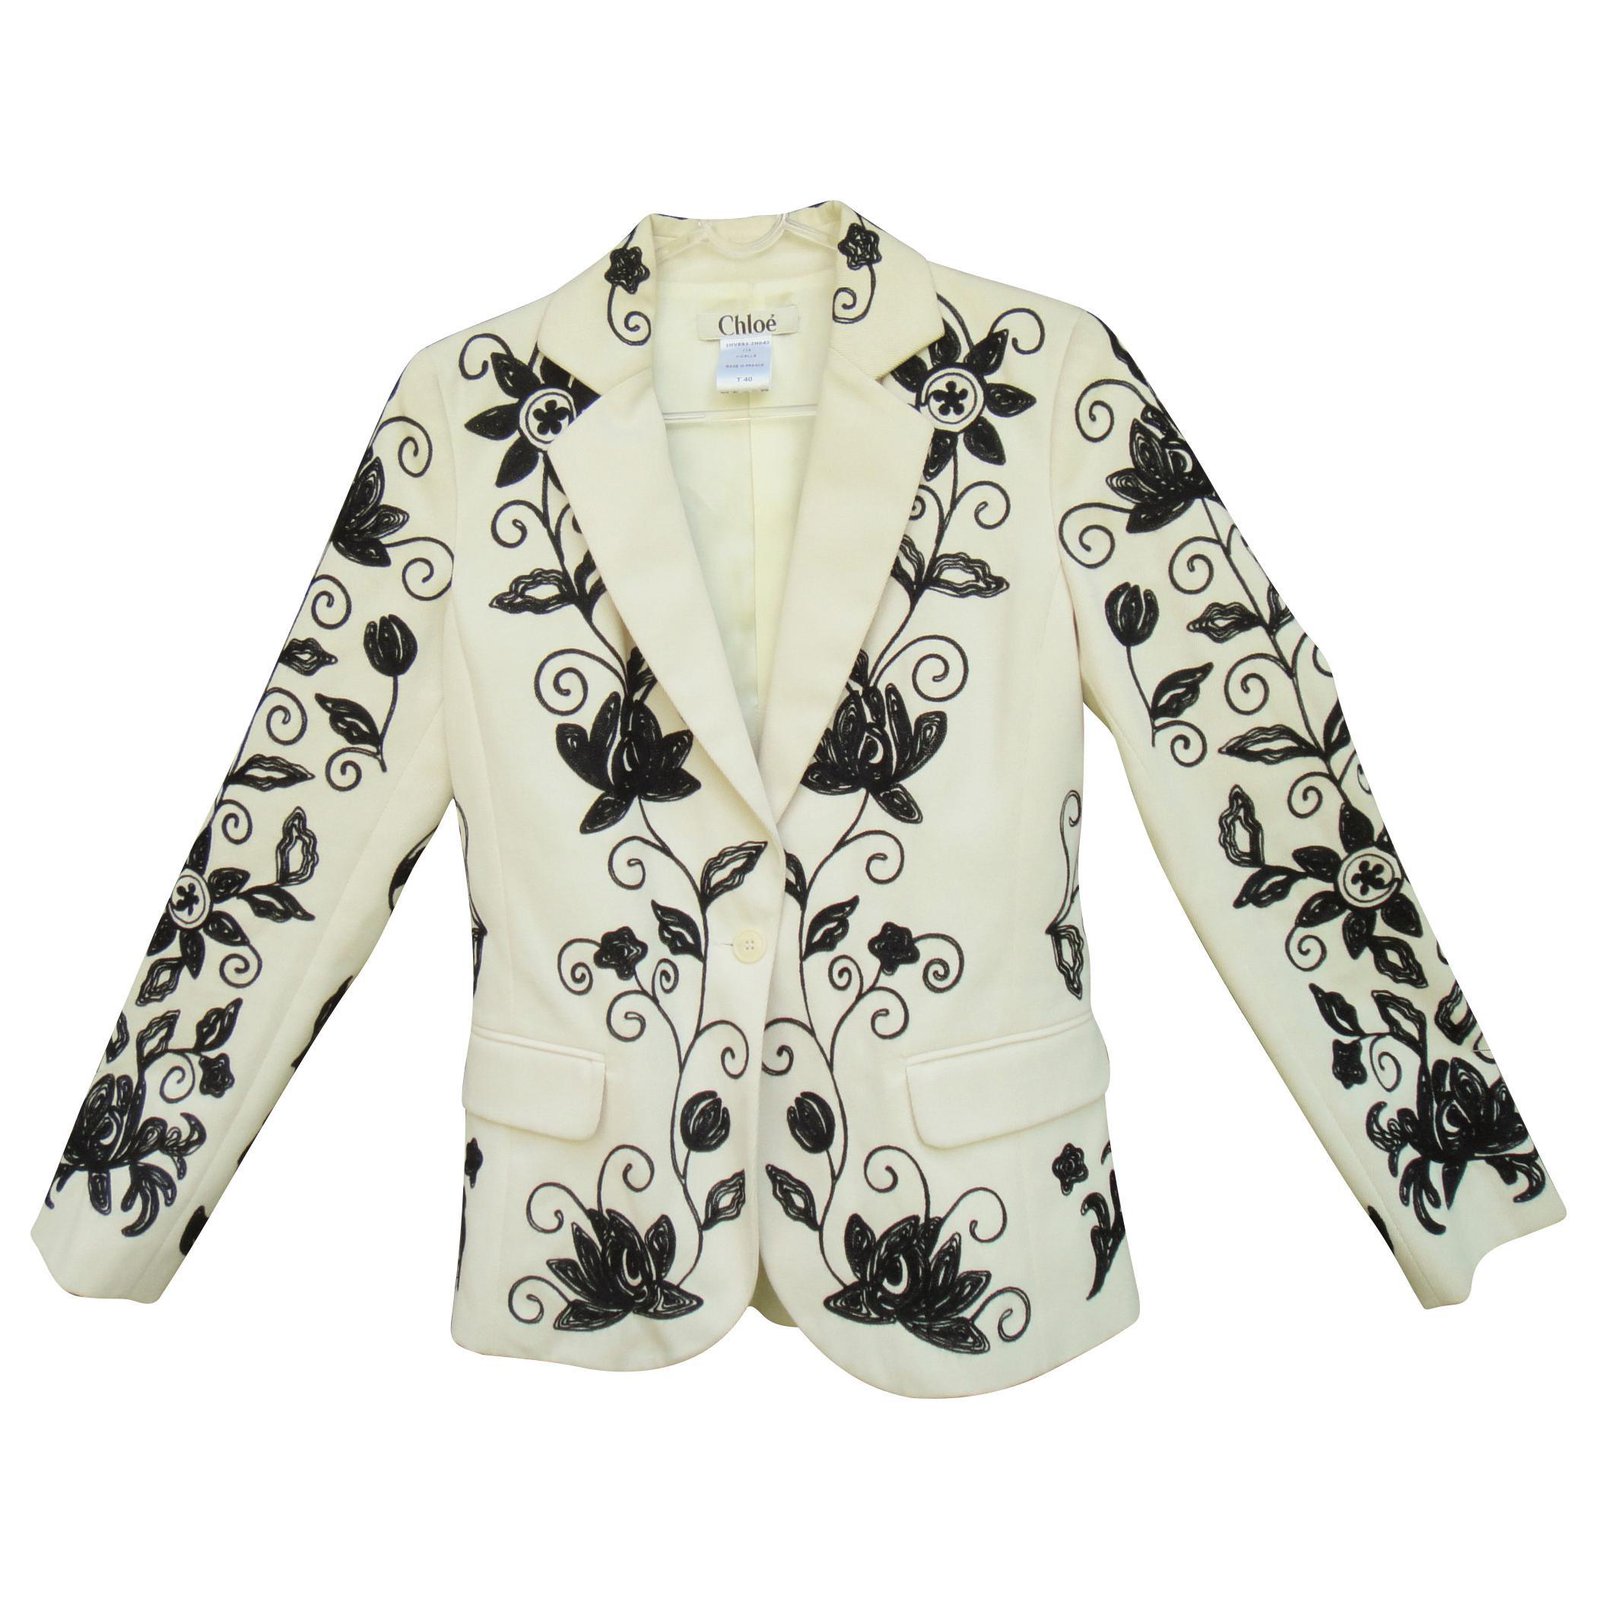 Chloé Embroidered Jacket